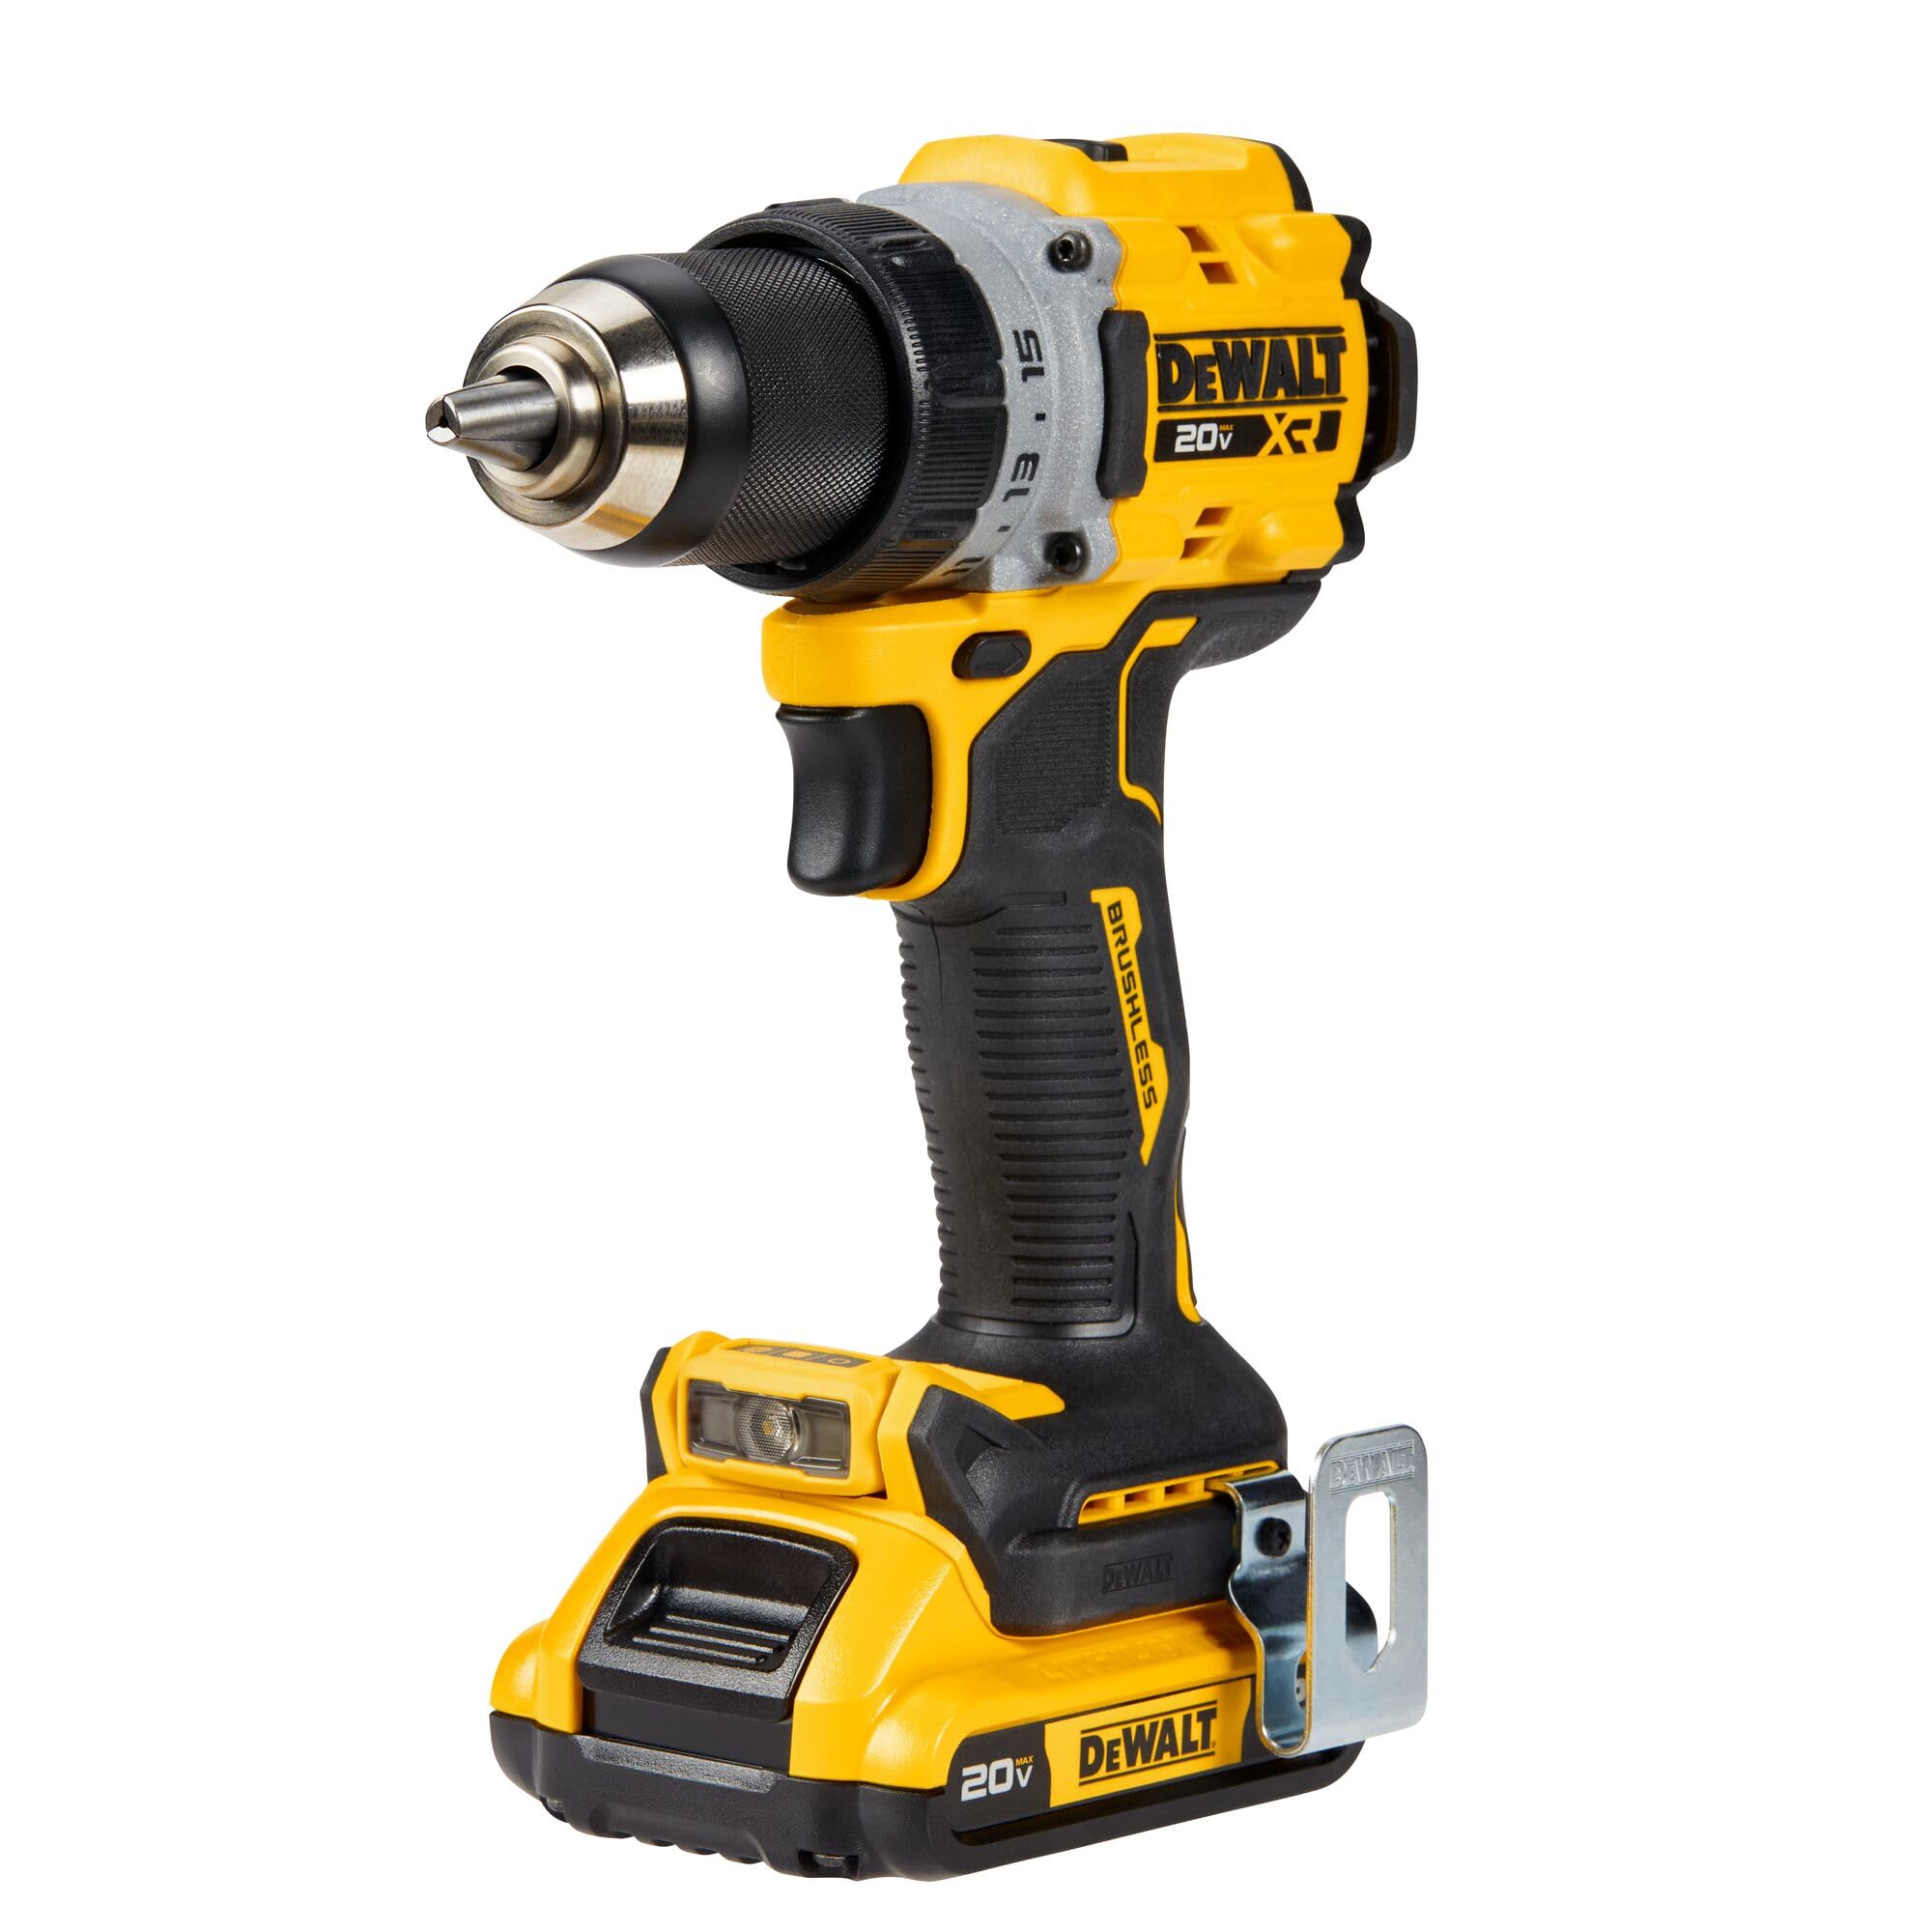 DEWALT 20V MAX XR Cordless Drill/Driver Kit, Brushless, Compact, with 2 Batteries and Charger